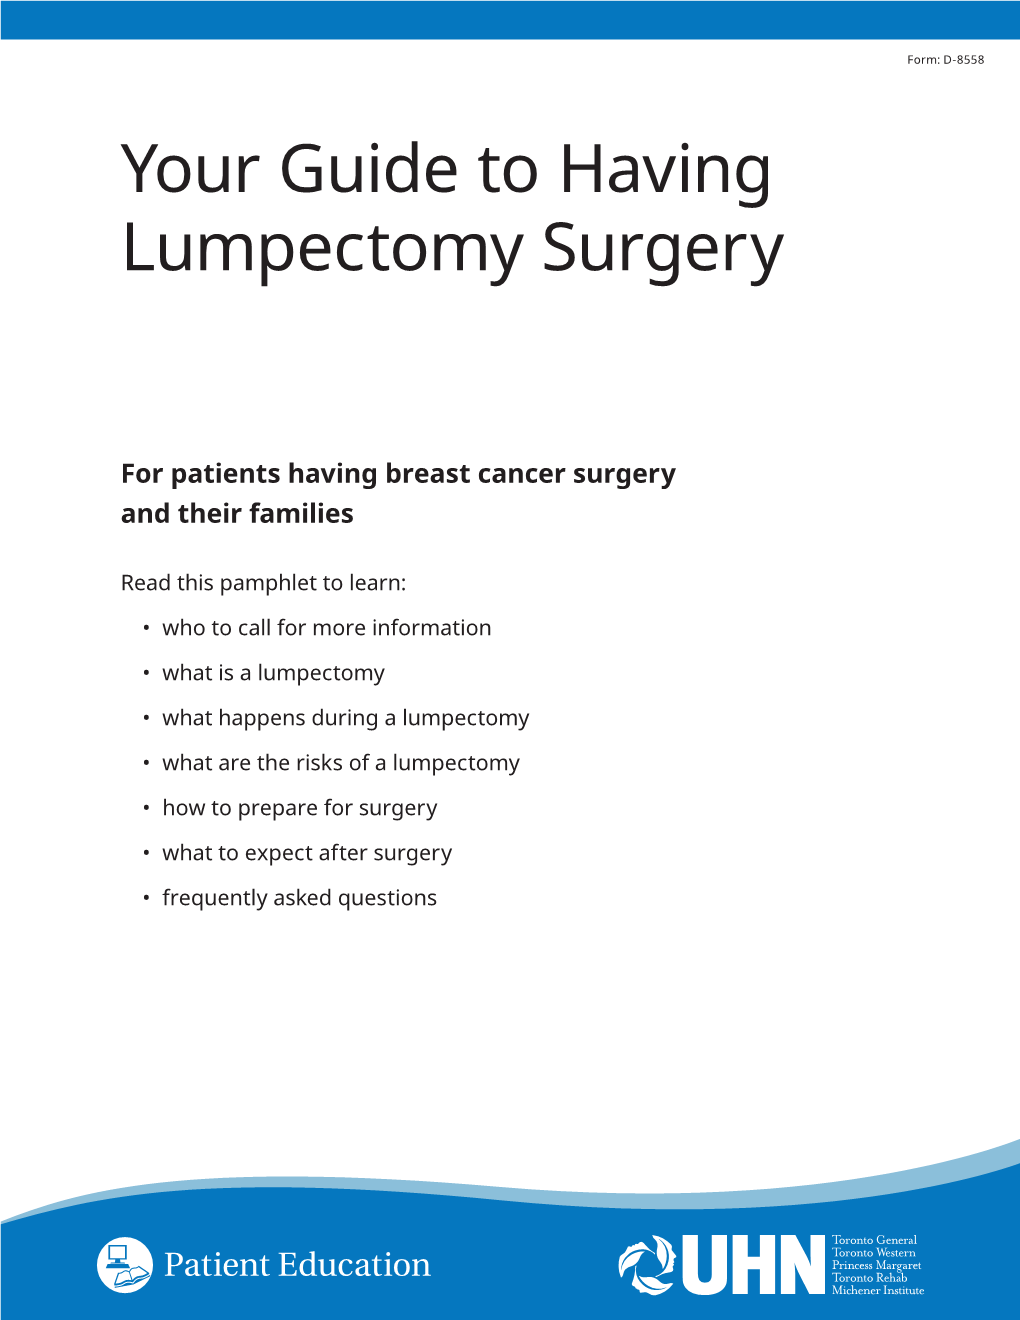 Your Guide to Having Lumpectomy Surgery